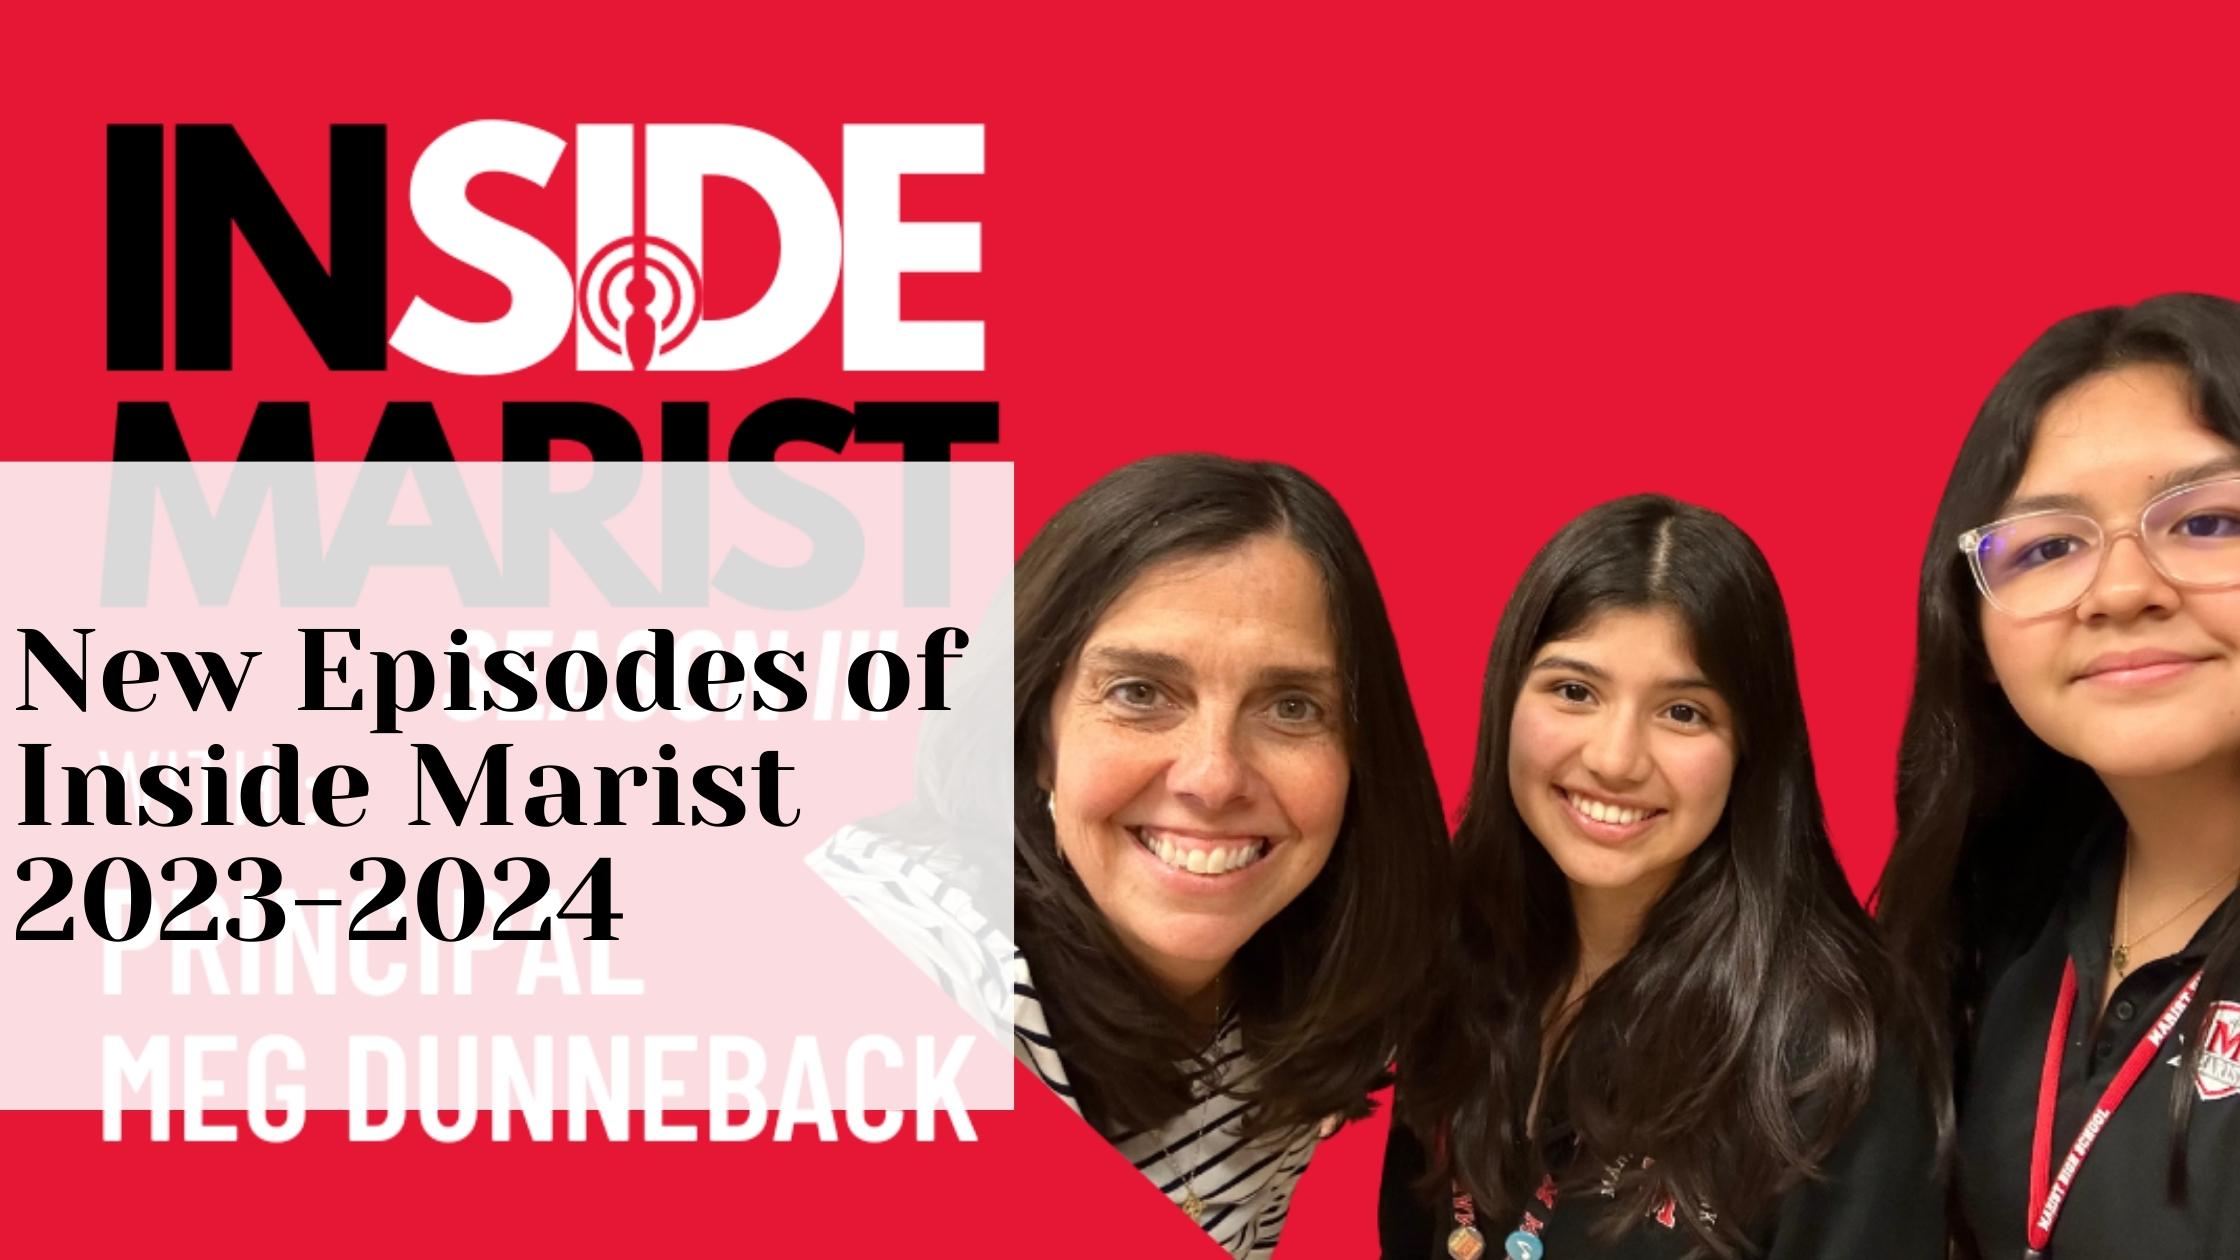 2023-2024 Episodes of Inside Marist – Another Series of Conversations w/ Students